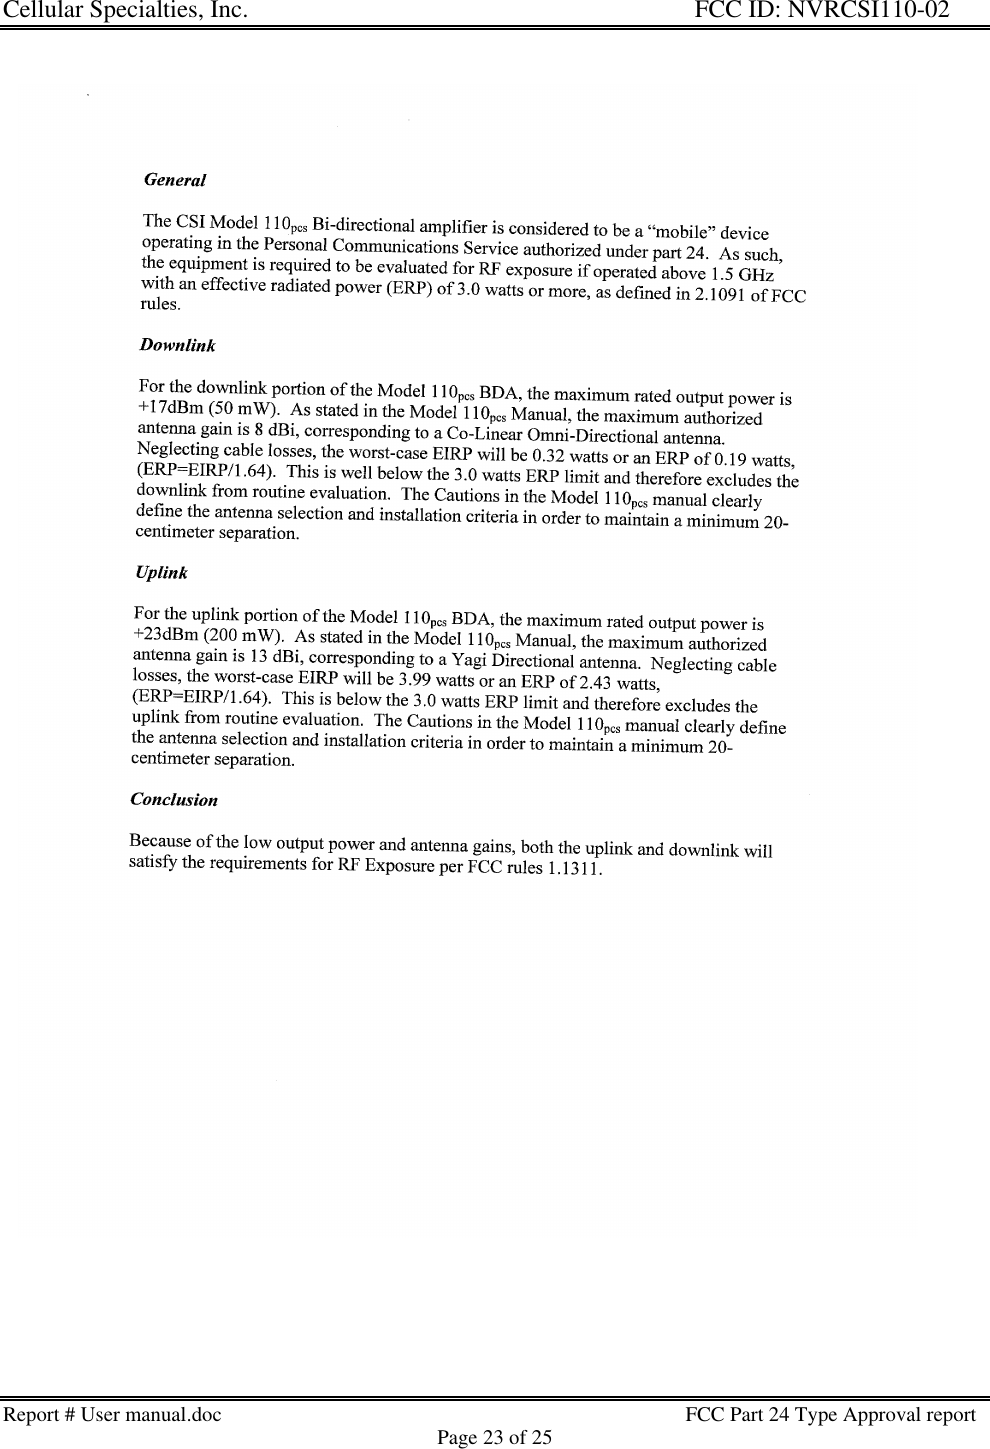 Cellular Specialties, Inc. FCC ID: NVRCSI110-02Report # User manual.doc                                                                                         FCC Part 24 Type Approval reportPage 23 of 25